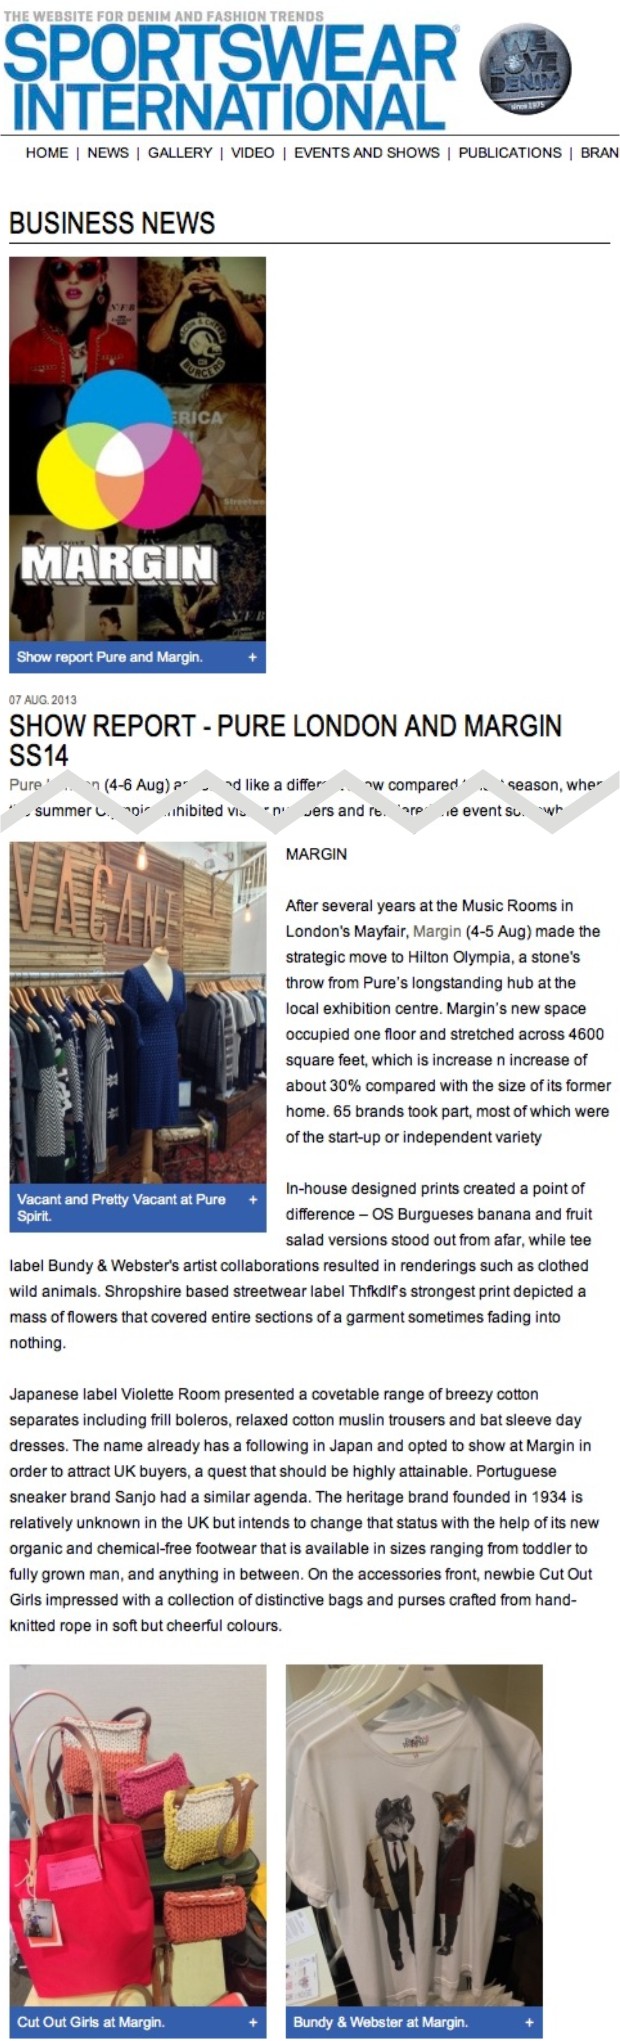 MARGIN  After several years at the Music Rooms in London's Mayfair, Margin (4-5 Aug) made the strategic move to Hilton Olympia, a stone's throw from Pure’s longstanding hub at the local exhibition centre. Margin’s new space occupied one floor and stretched across 4600 square feet, which is increase n increase of about 30% compared with the size of its former home. 65 brands took part, most of which were of the start-up or independent variety  In-house designed prints created a point of difference – OS Burgueses banana and fruit salad versions stood out from afar, while tee label Bundy & Webster's artist collaborations resulted in renderings such as clothed wild animals. Shropshire based streetwear label Thfkdlf’s strongest print depicted a mass of flowers that covered entire sections of a garment sometimes fading into nothing.  Japanese label Violette Room presented a covetable range of breezy cotton separates including frill boleros, relaxed cotton muslin trousers and bat sleeve day dresses. The name already has a following in Japan and opted to show at Margin in order to attract UK buyers, a quest that should be highly attainable. Portuguese sneaker brand Sanjo had a similar agenda. The heritage brand founded in 1934 is relatively unknown in the UK but intends to change that status with the help of its new organic and chemical-free footwear that is available in sizes ranging from toddler to fully grown man, and anything in between. On the accessories front, newbie Cut Out Girls impressed with a collection of distinctive bags and purses crafted from hand-knitted rope in soft but cheerful colours.